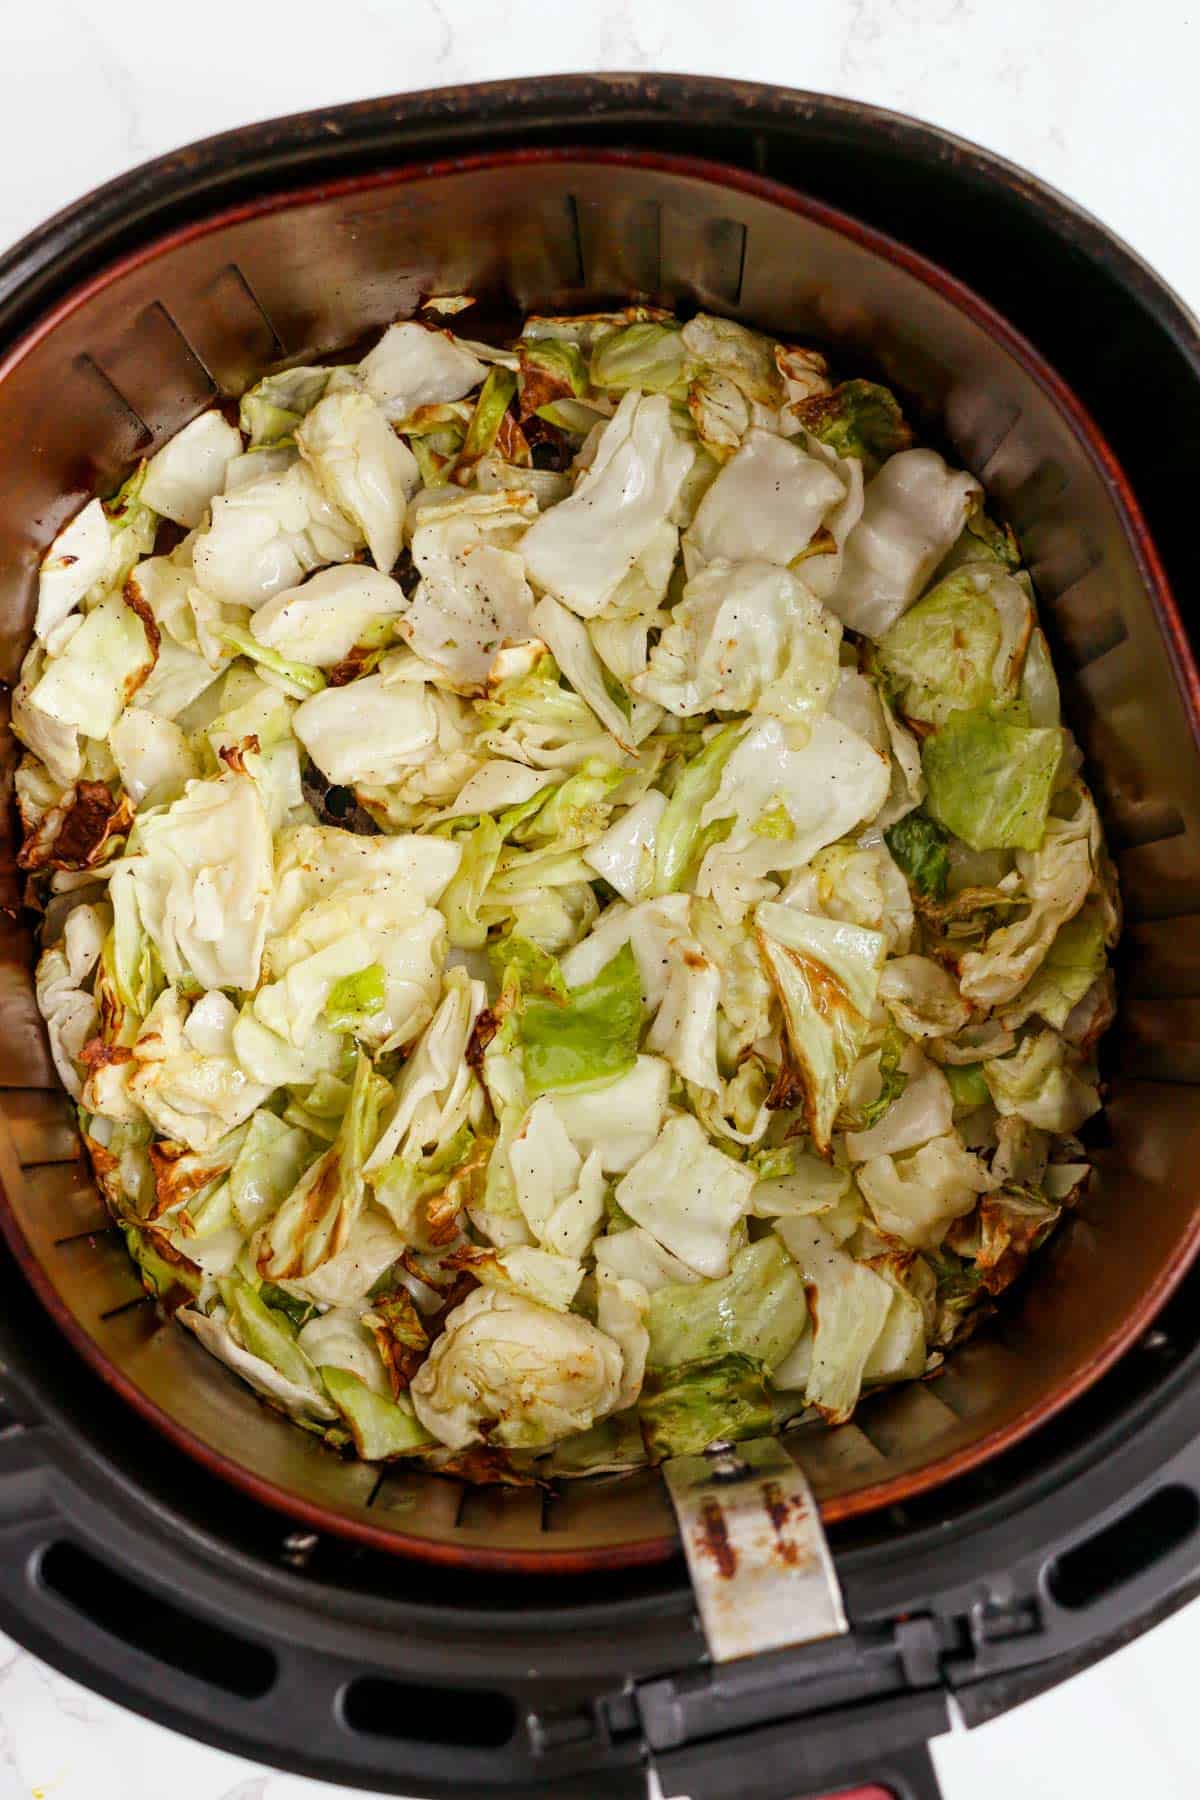 cabbage in air fryer after cooking